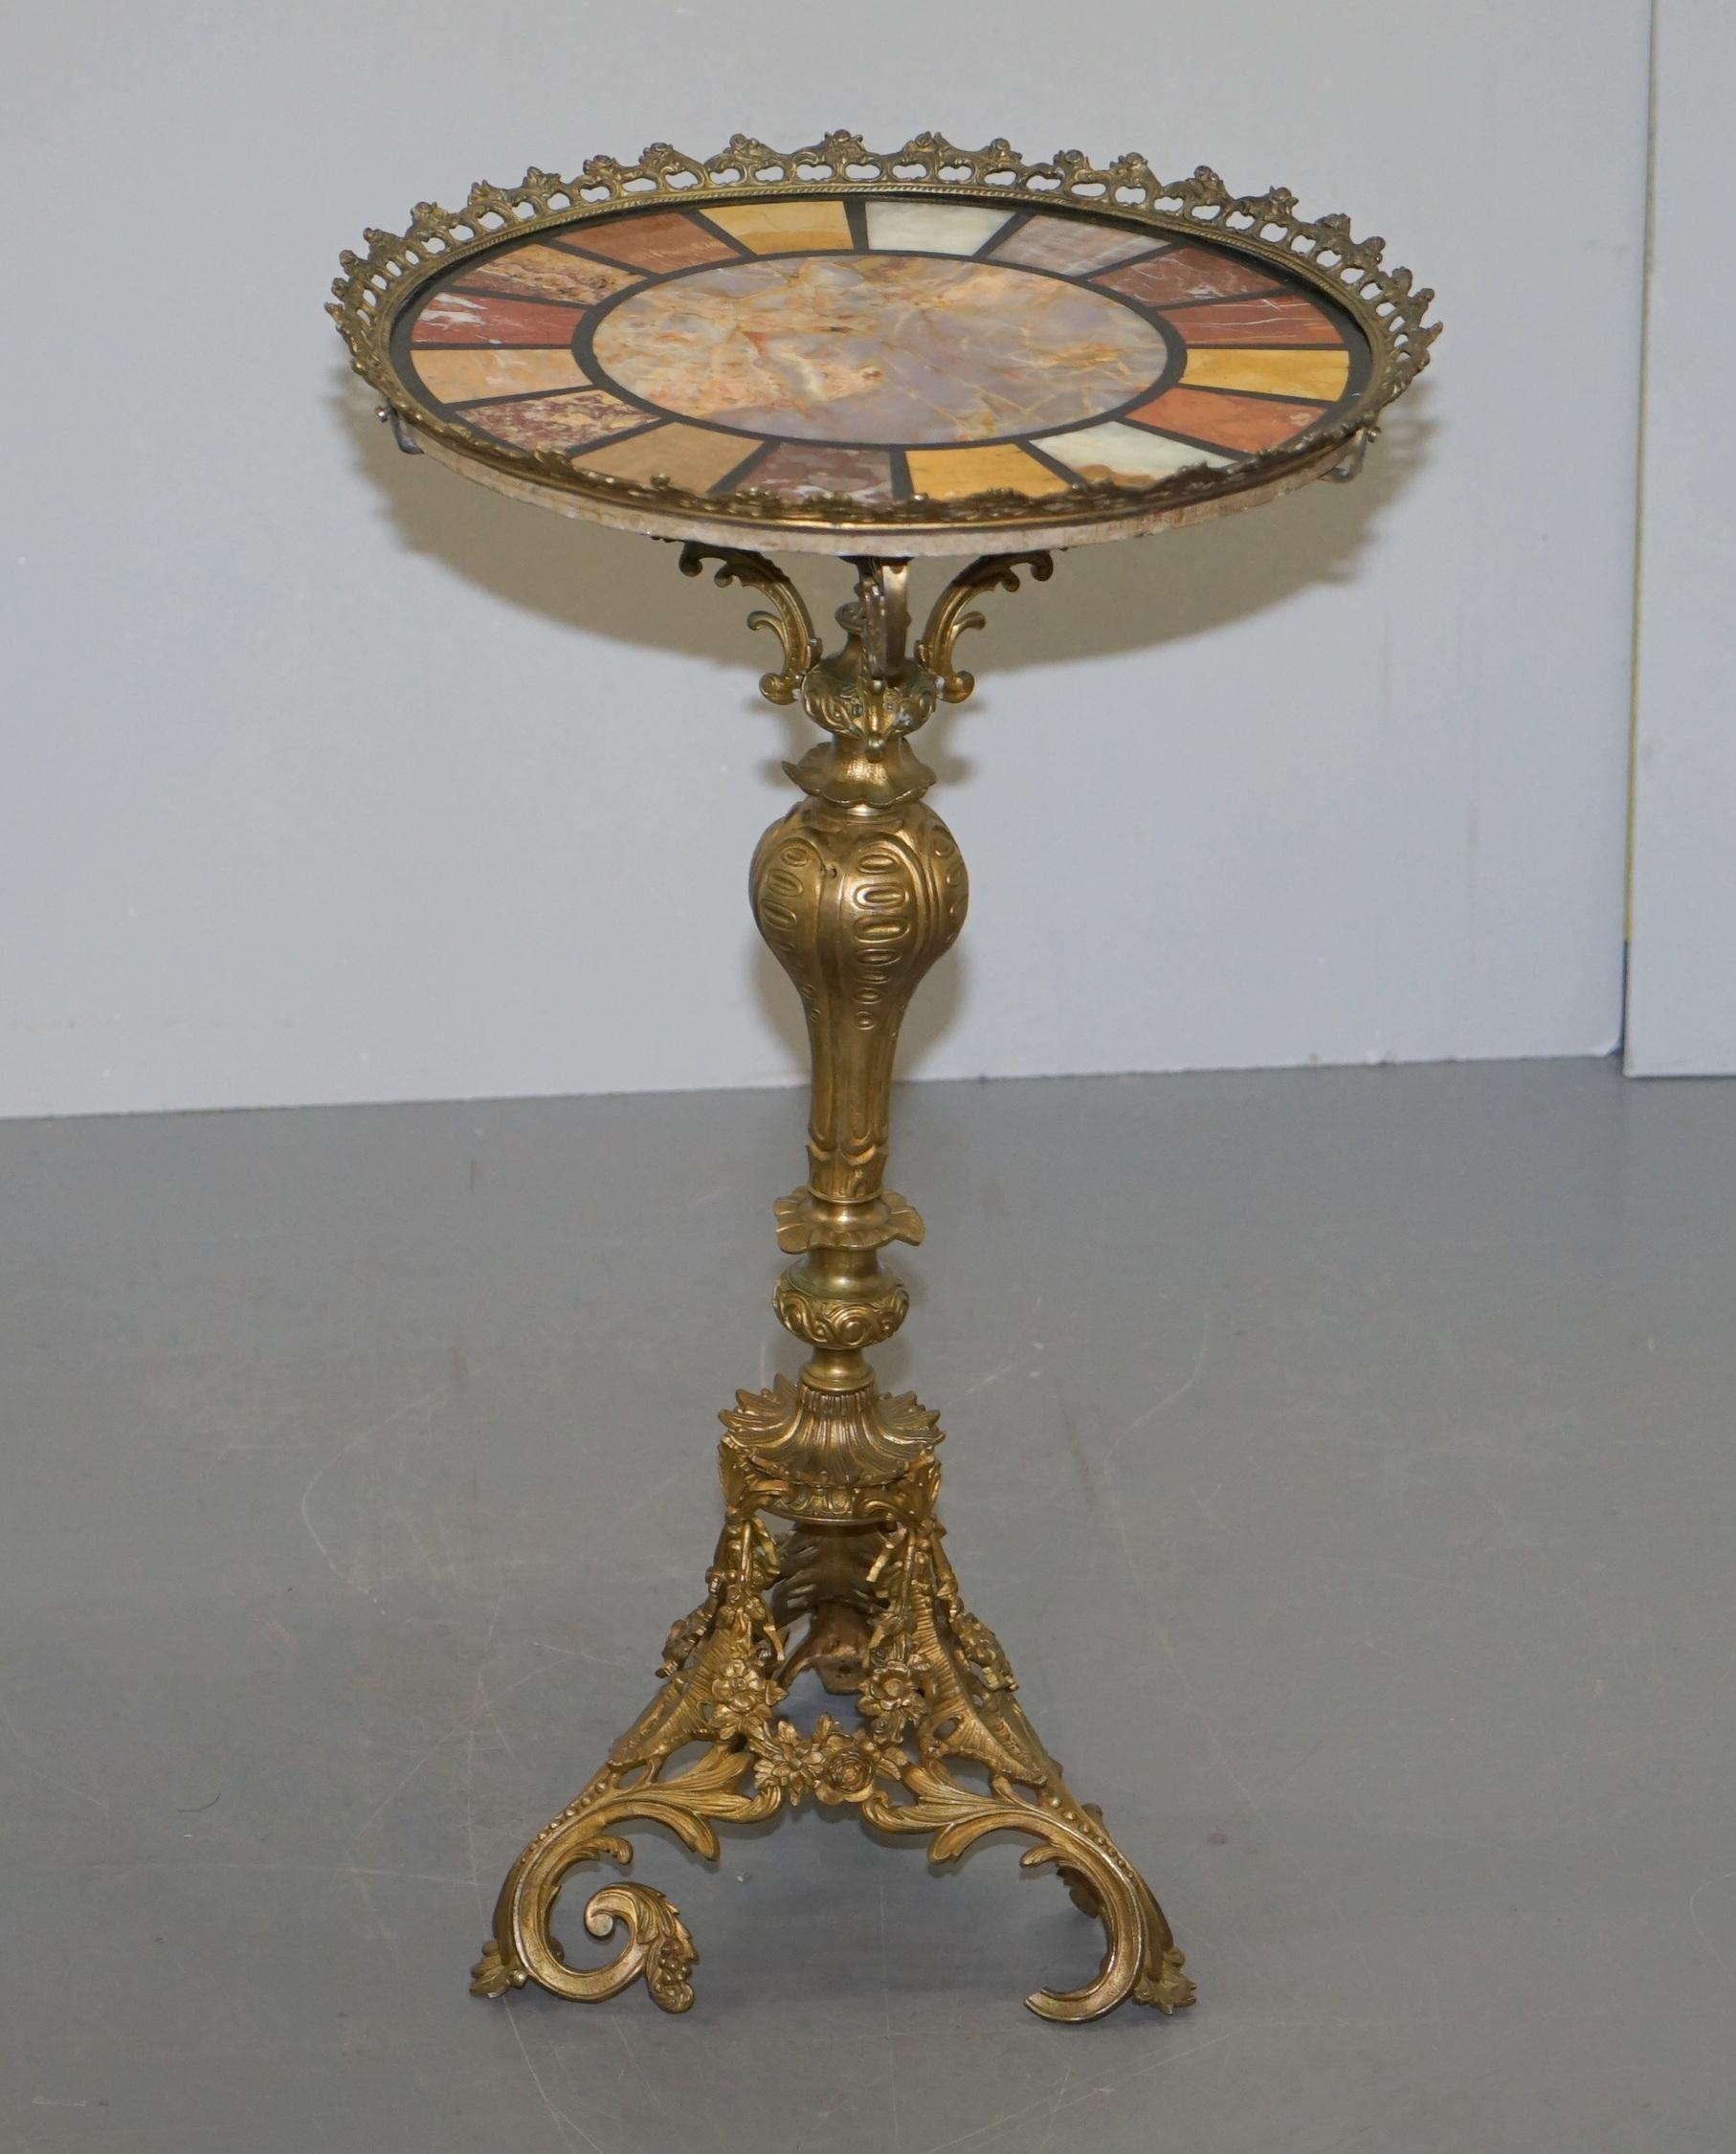 We are delighted to offer for sale this really quite rare late Regency to early Georgian circa 1820 Italian Brass gallery rail and Specimen marble occasional side table

A very good looking well made and highly decorative table. Its all solid